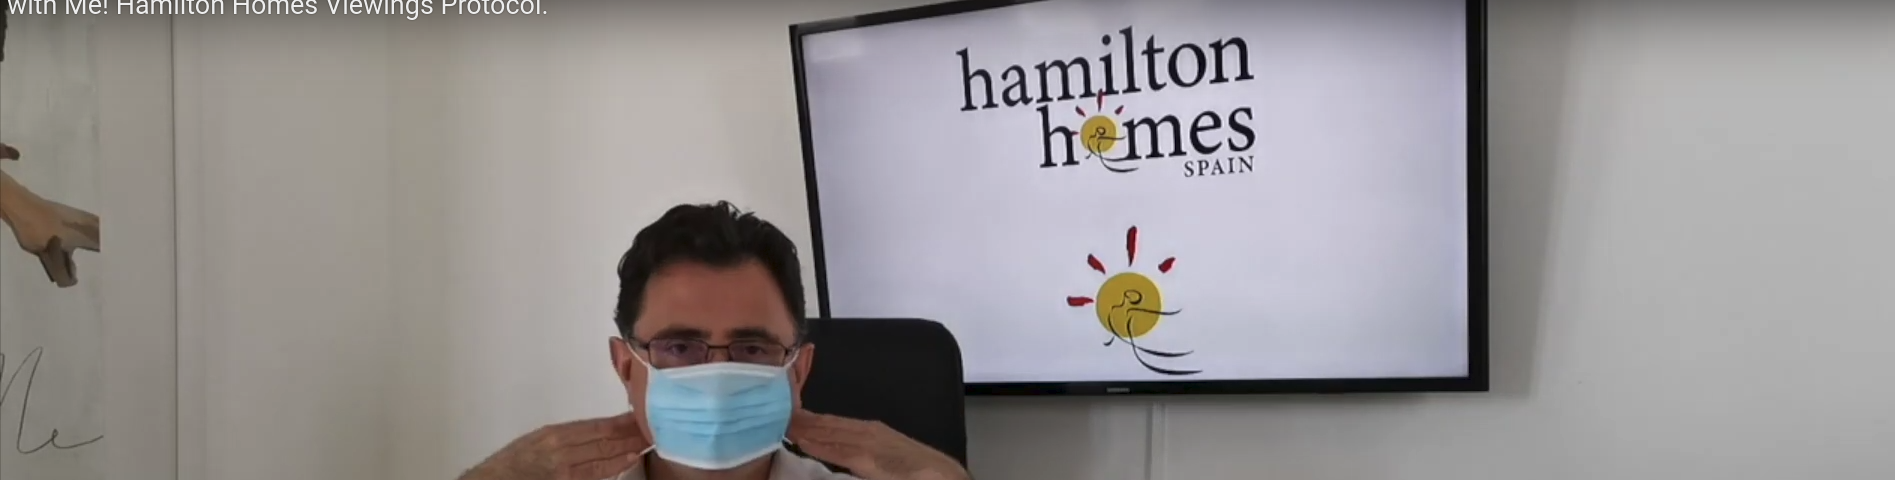 Andrew putting on a mask - Hamilton Homes Covid19 protocol